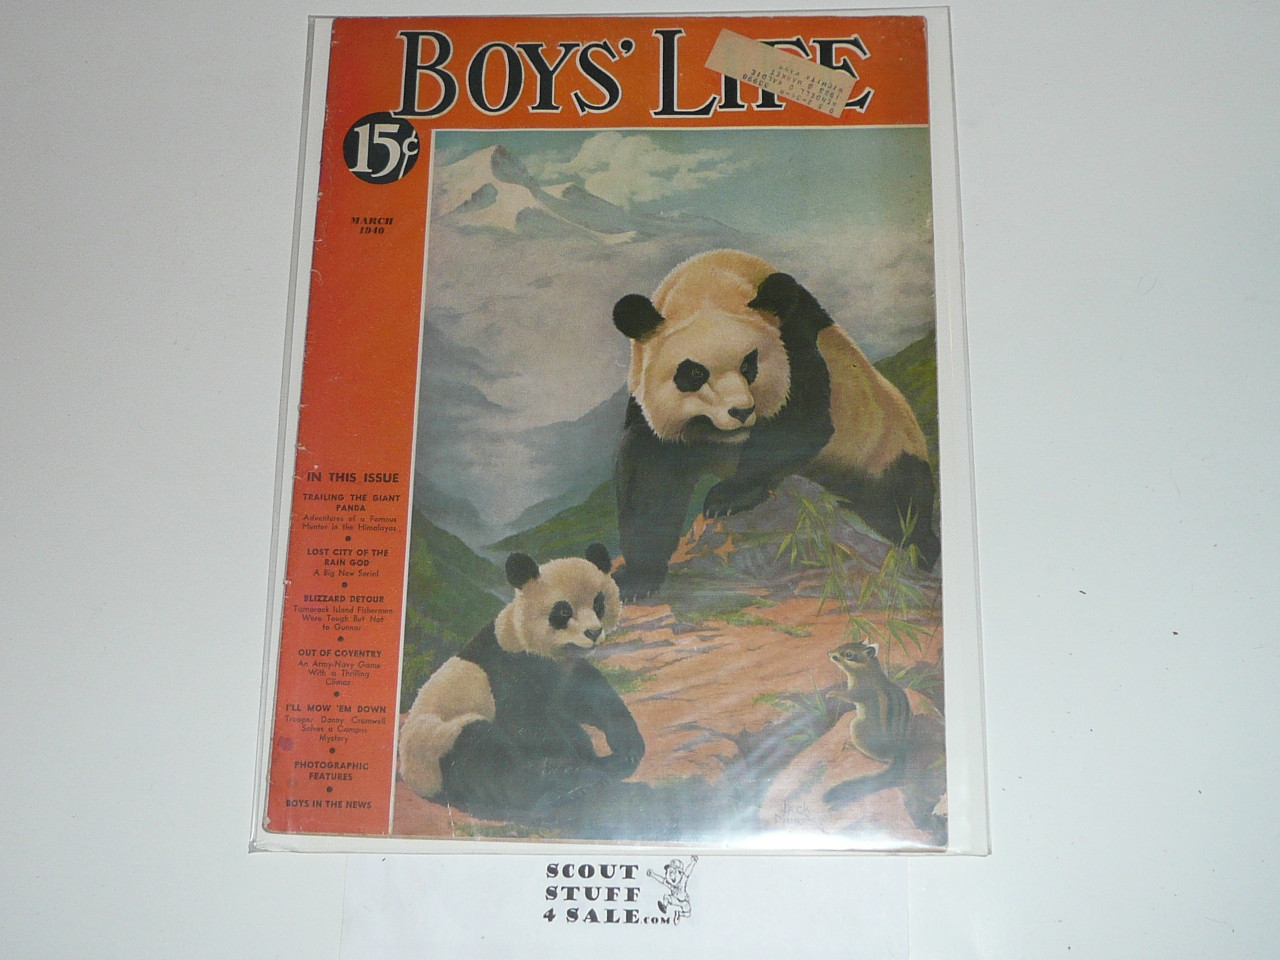 1940, March Boys' Life Magazine, Boy Scouts of America